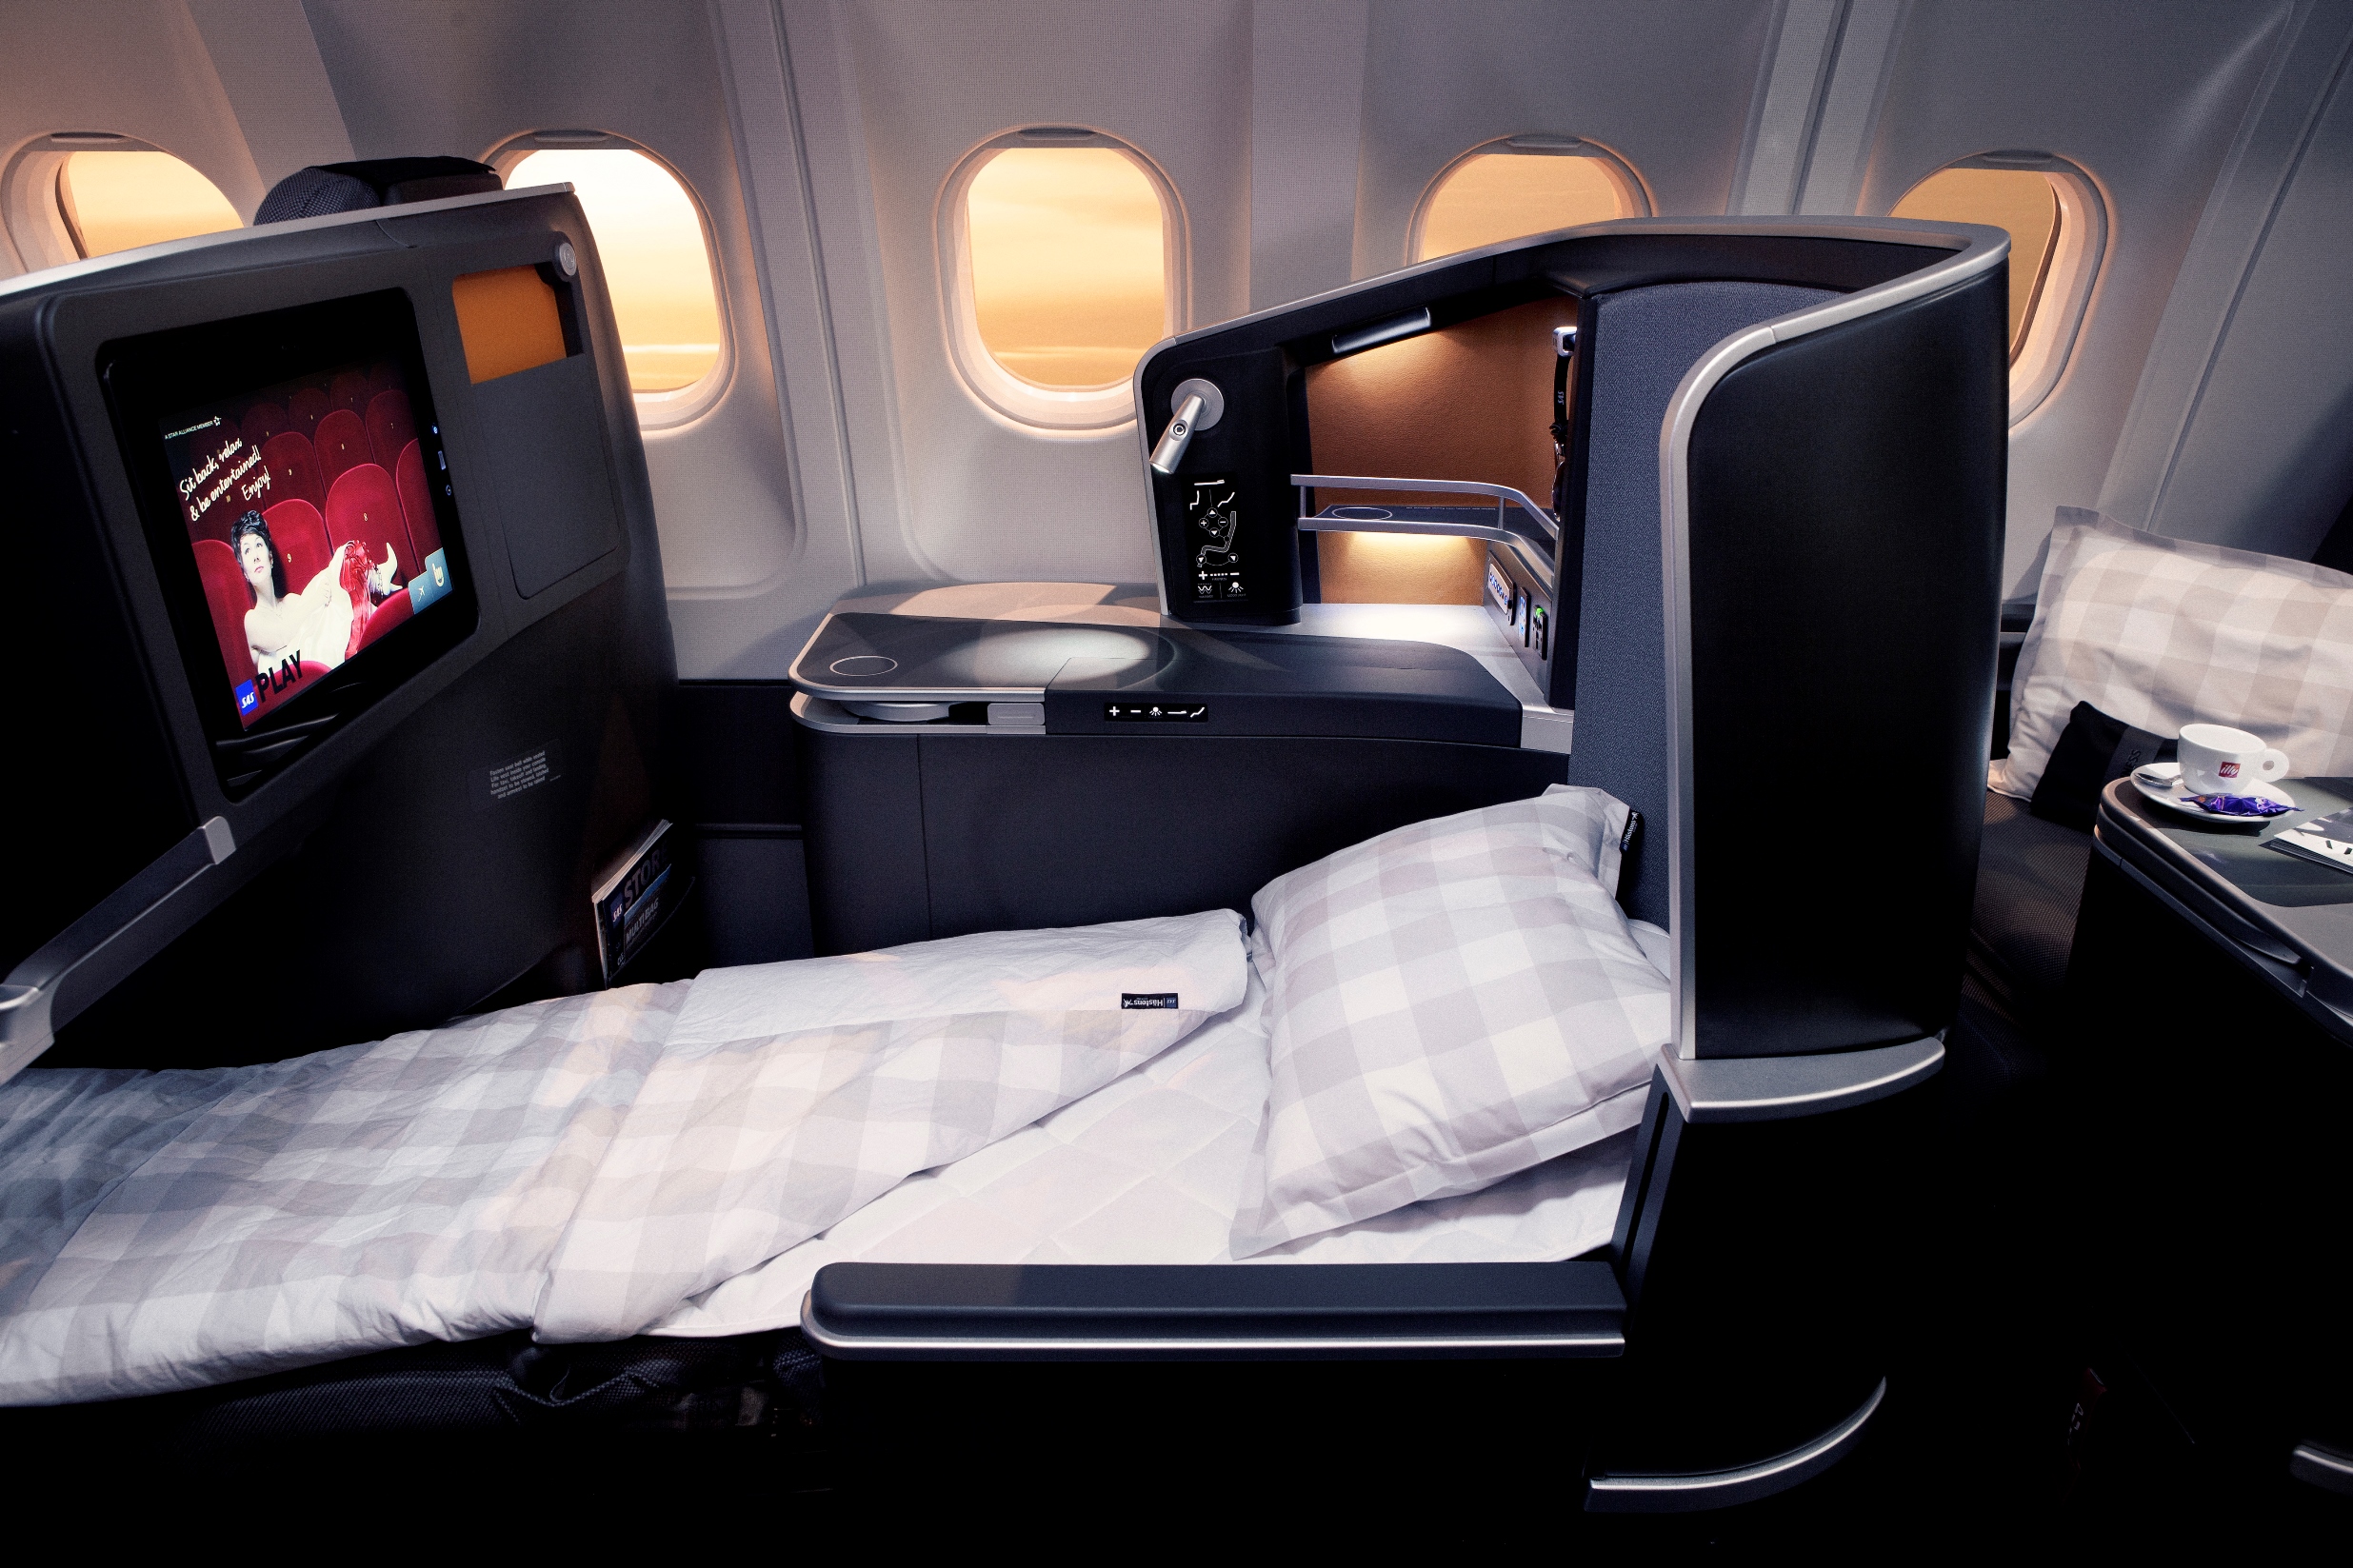 8 interesting airline product and service innovations for the first half of 2015